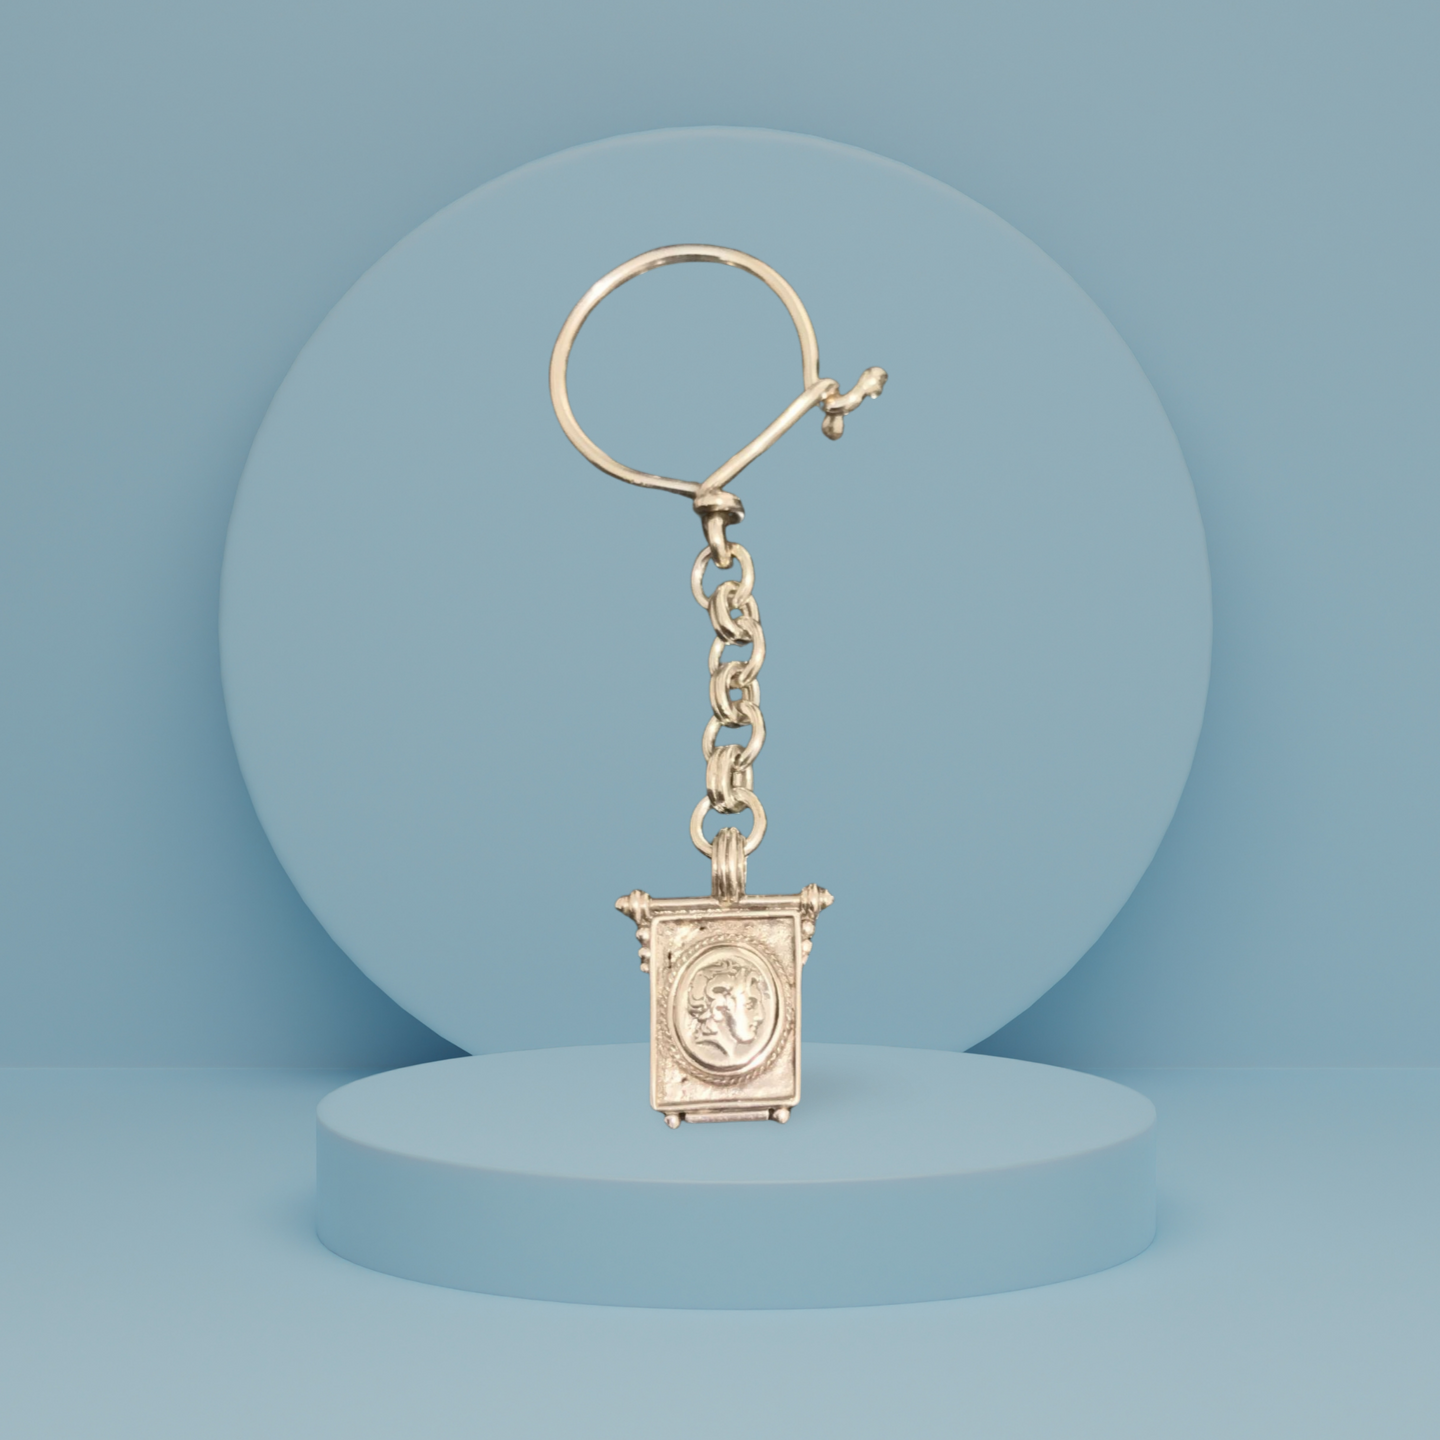 Alexander the Great Key ring in sterling silver, silver keychain, mens gift